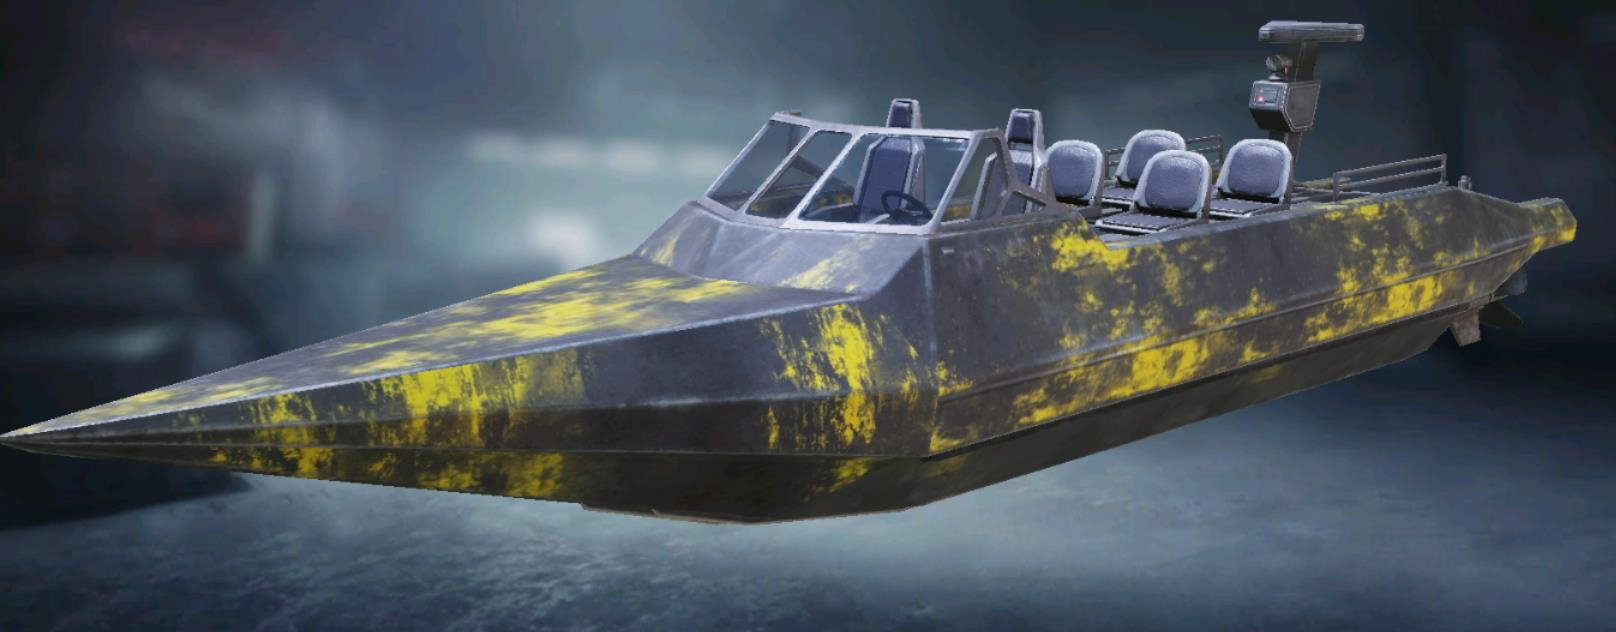 Boat Worn Yellow, Uncommon camo in Call of Duty Mobile